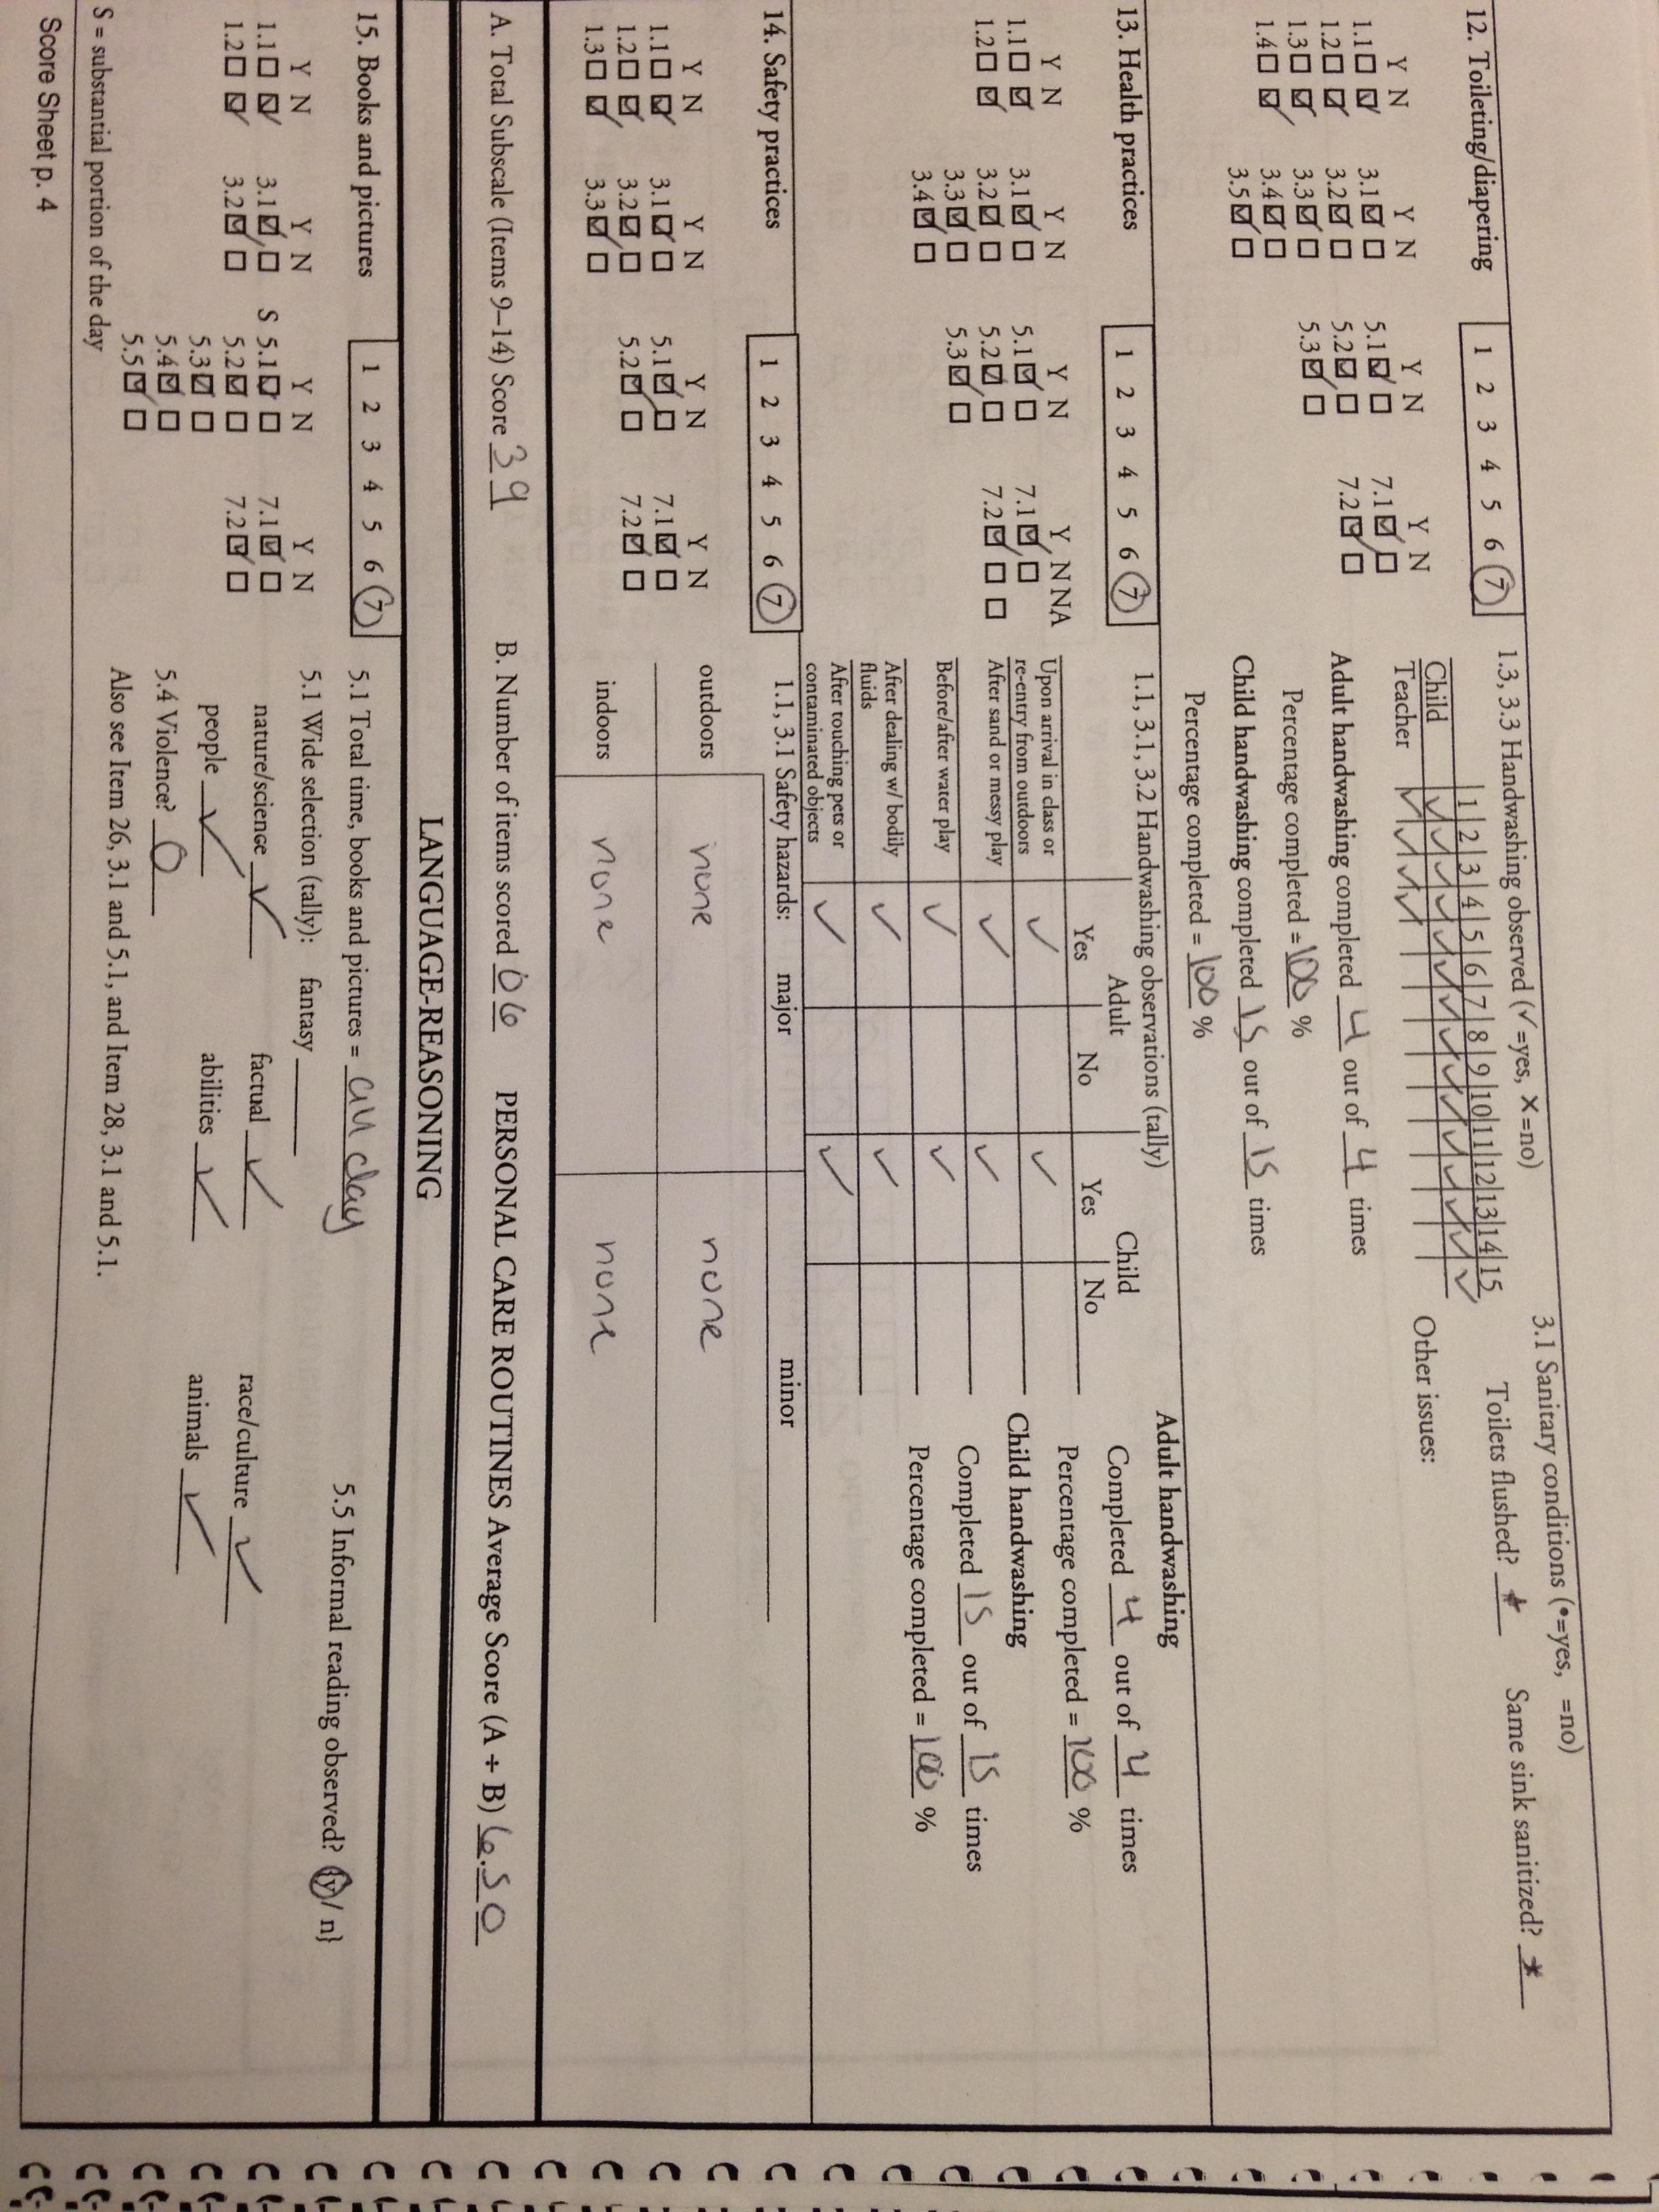 Ecers Rating Scale Score Sheet